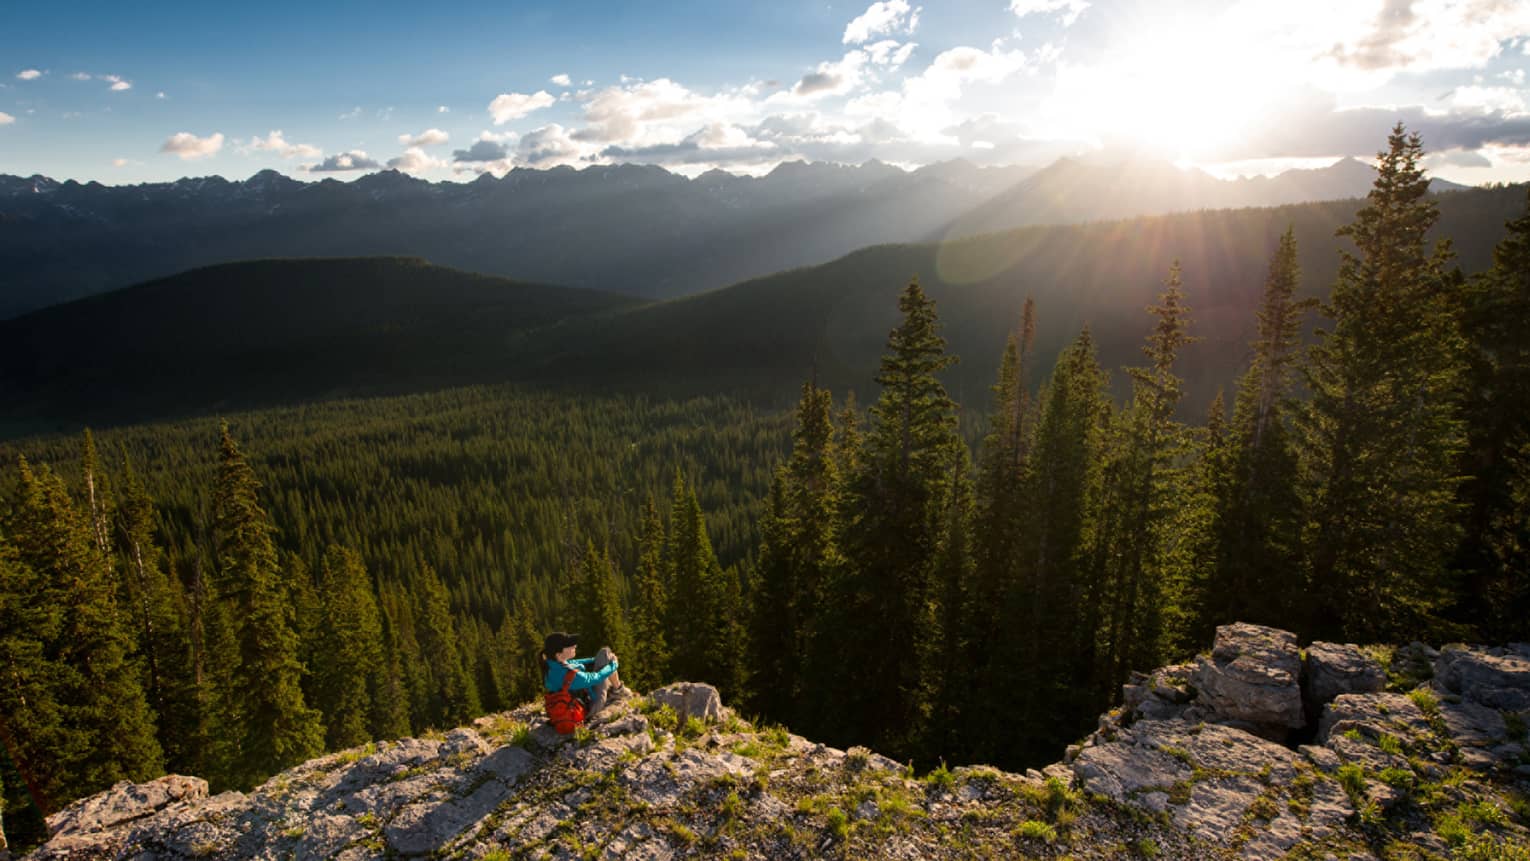 Person sits at edge of cliff overlooking trees, mountains as sun starts to set